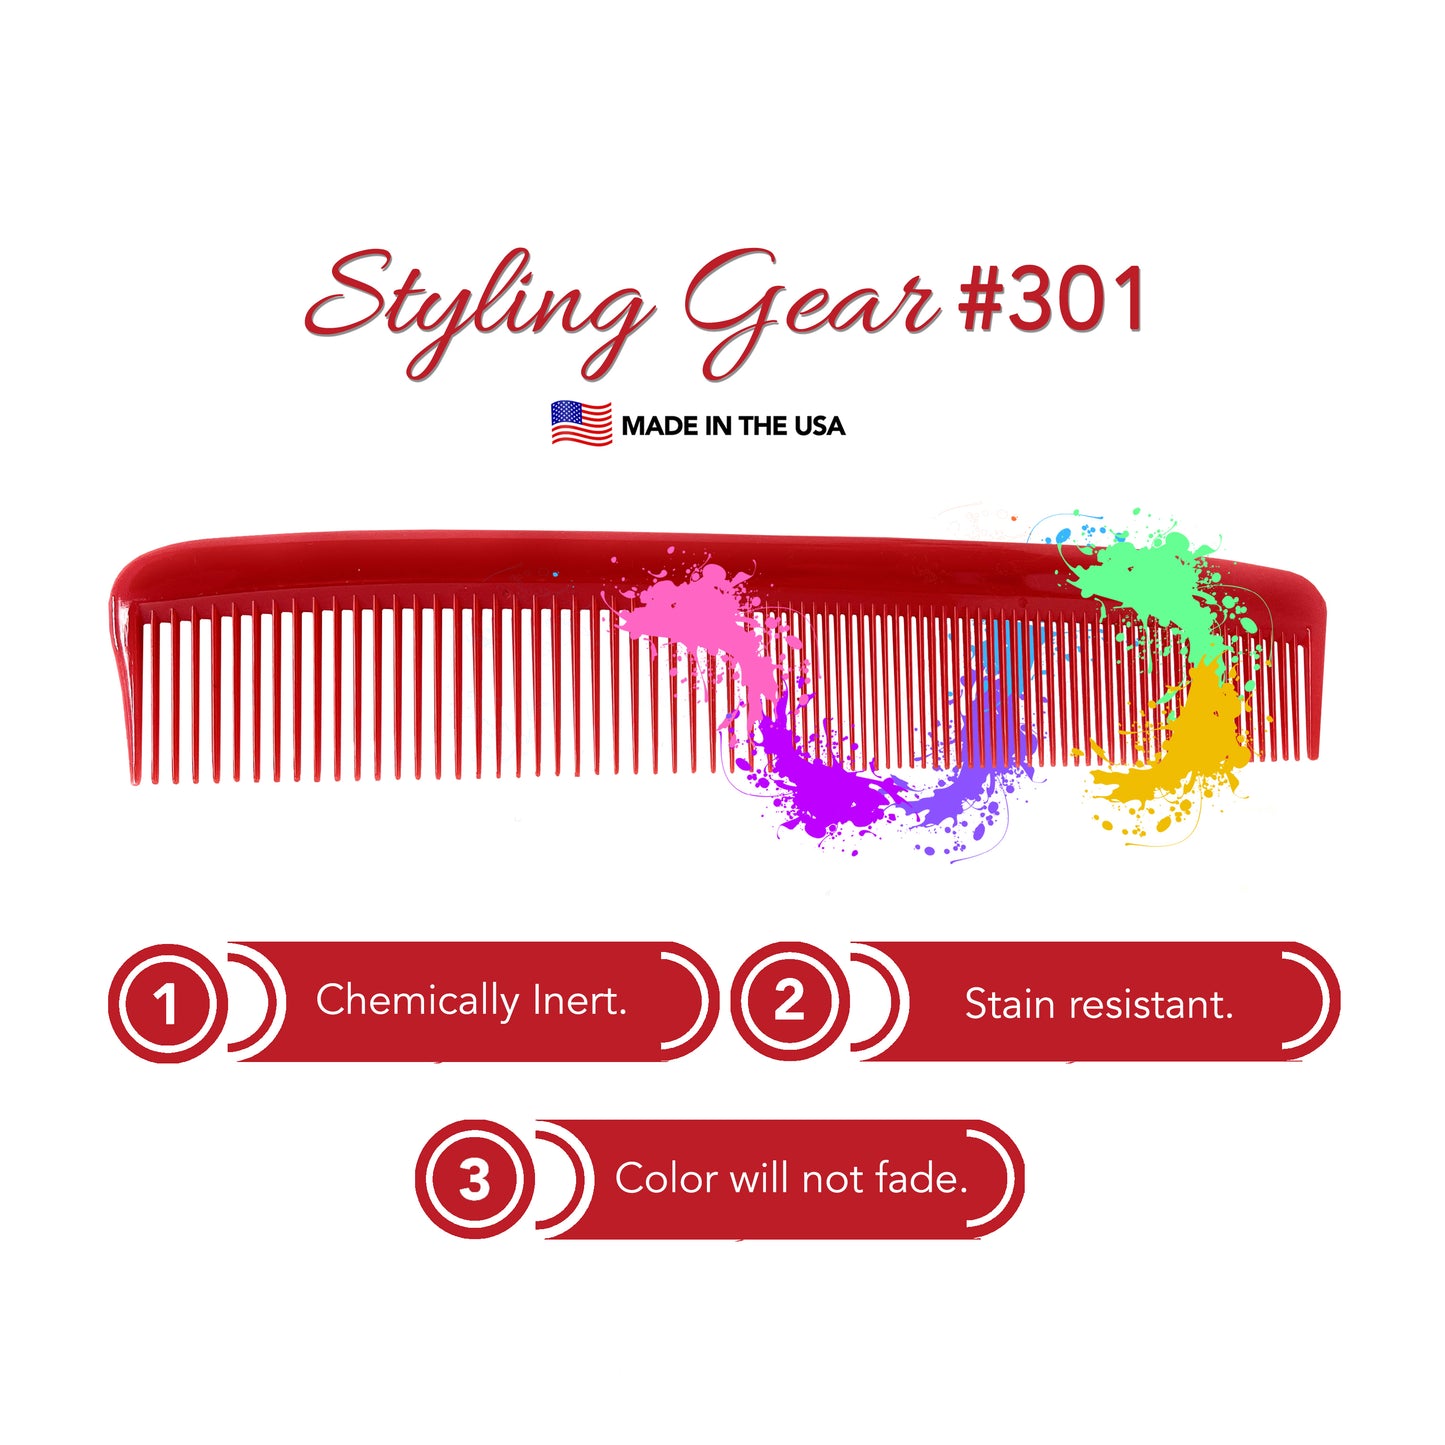 Styling Gear 301 Hair Combs Cutting Barber Hair Stylist Shampoo Combs All Purpose Parting Wide And Fine Tooth  1 Pc.